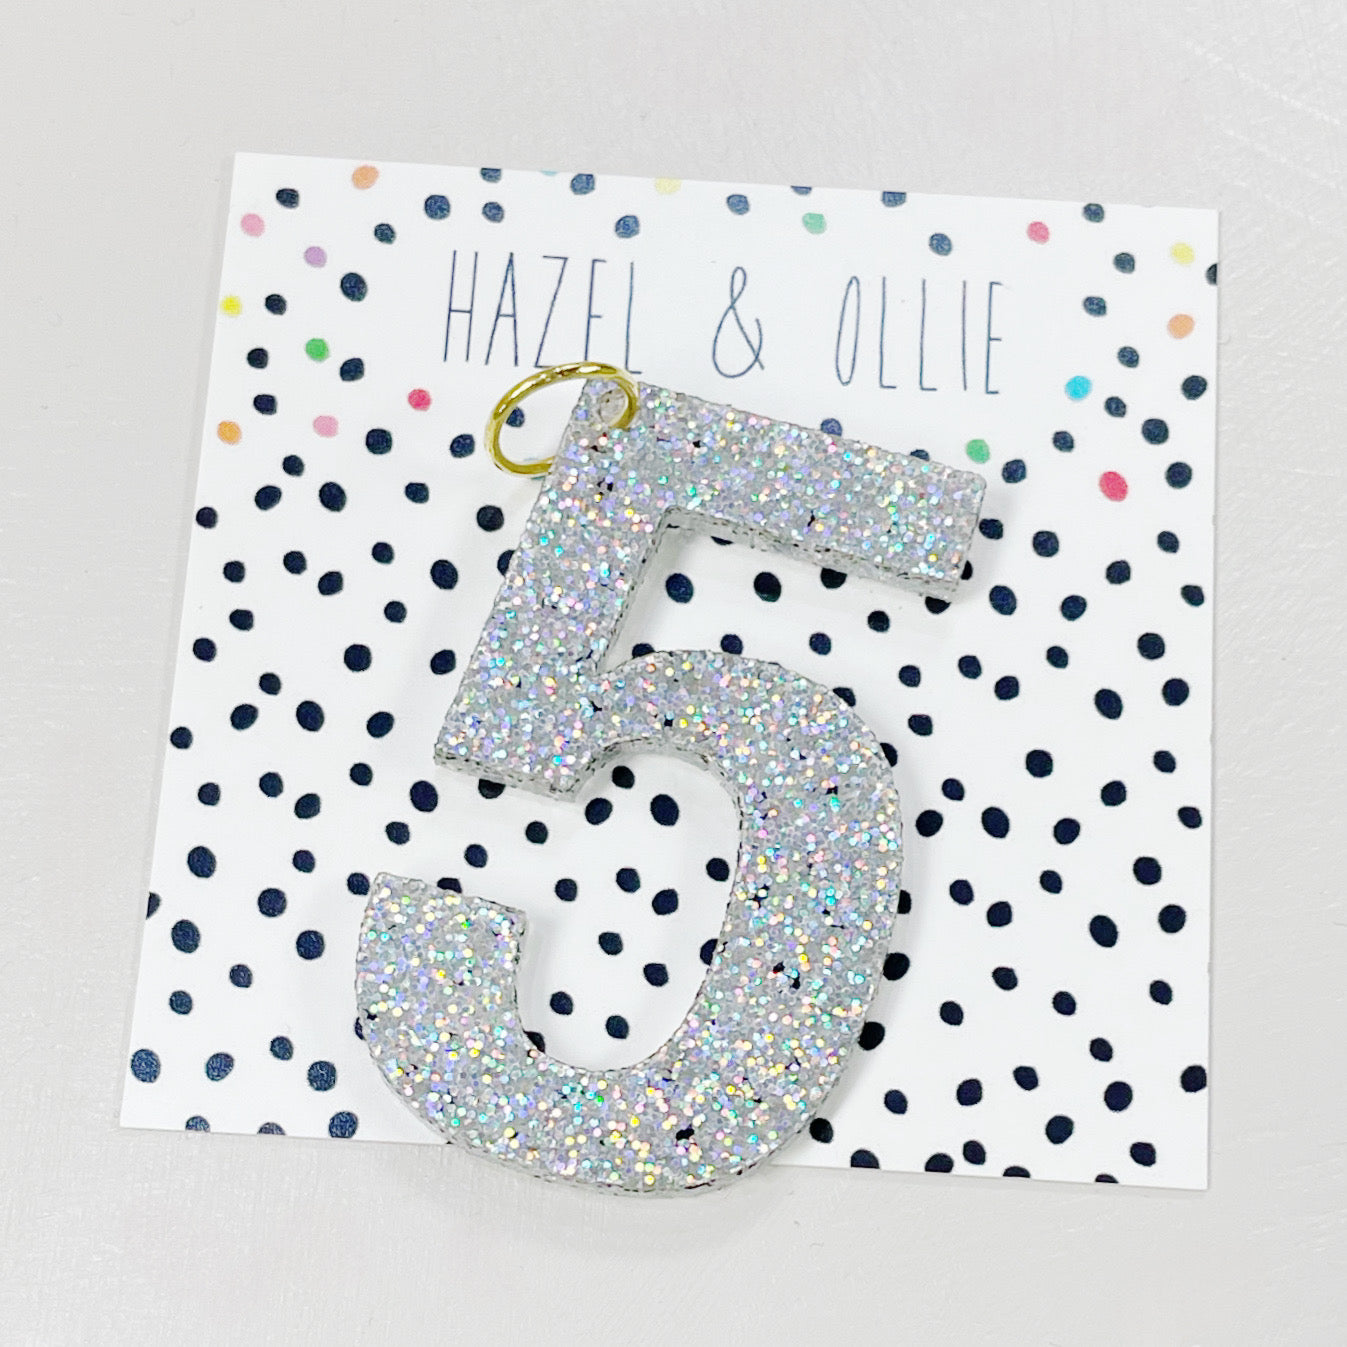 Holographic Glitter Birthday Numbers